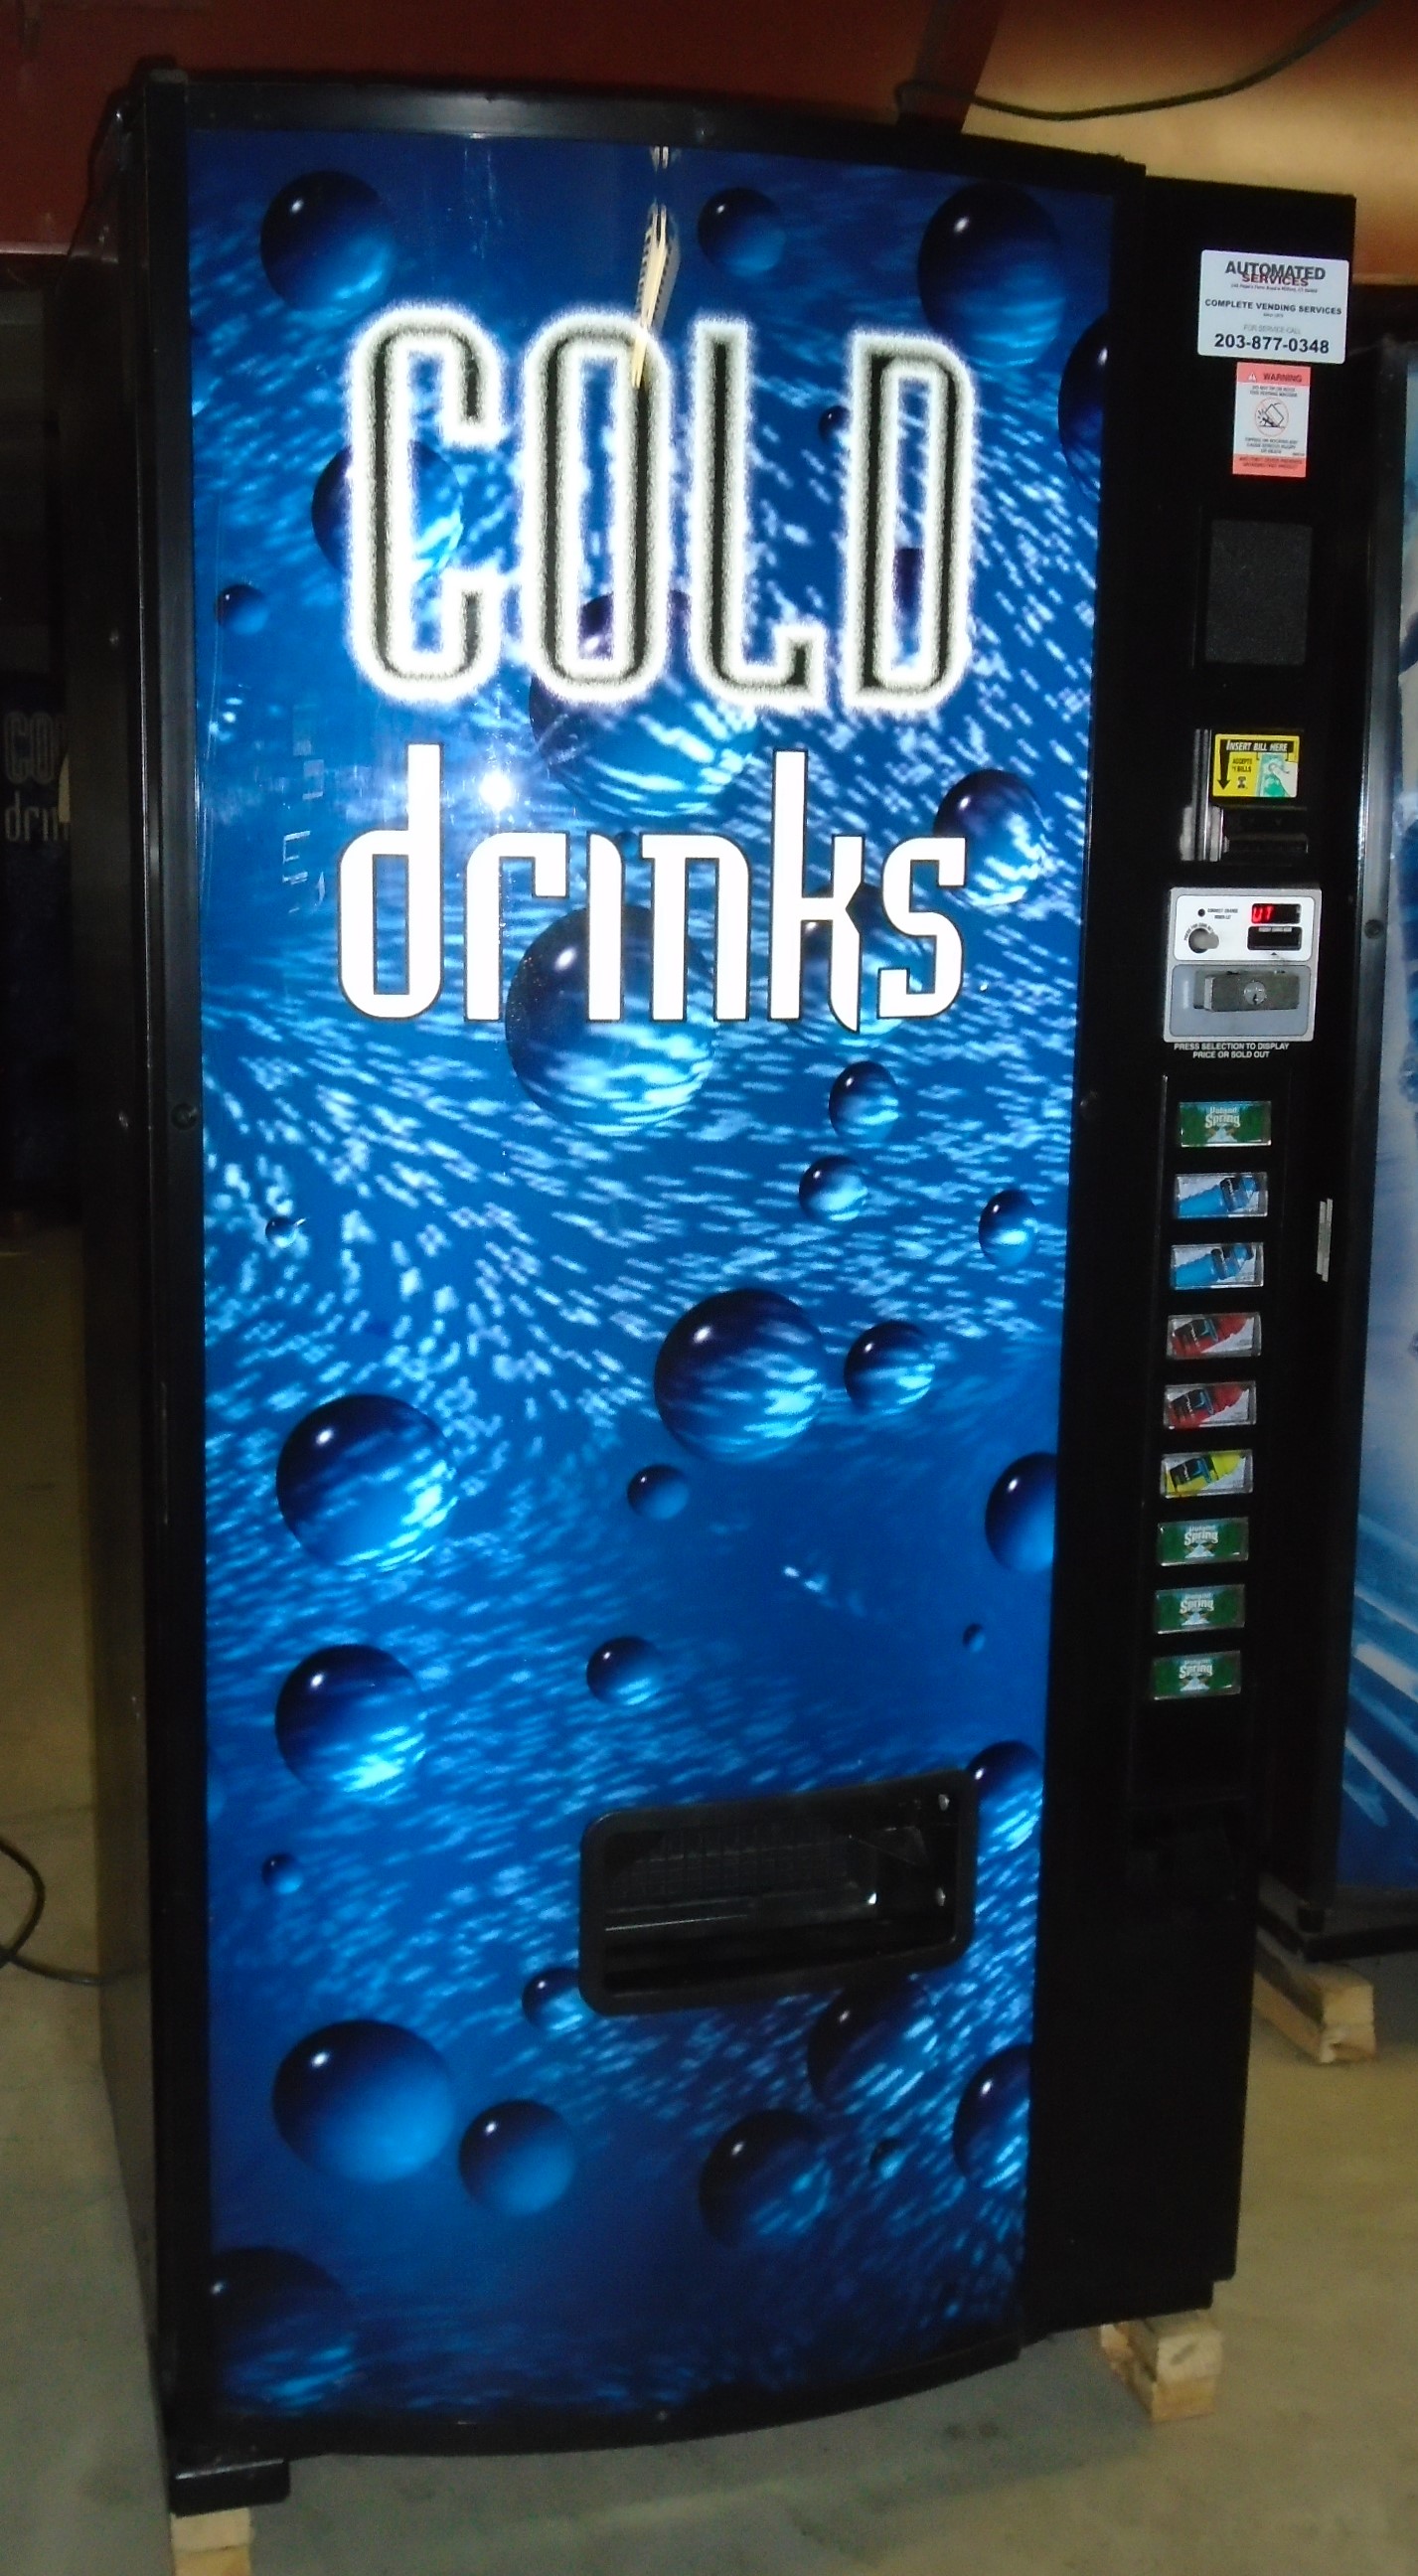 https://coinoppartsetc.com/sites/default/files/products/Dixie%20Narco%20501E%209%20SELECTION%20SODA%20COLD%20DRINK%20Vending%20Machine%20for%20sale.JPG